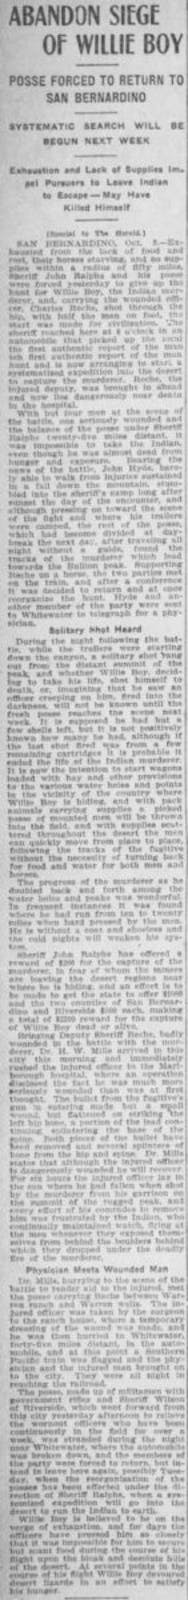 Oct. 10, 1909 - Los Angeles Herald article clipping